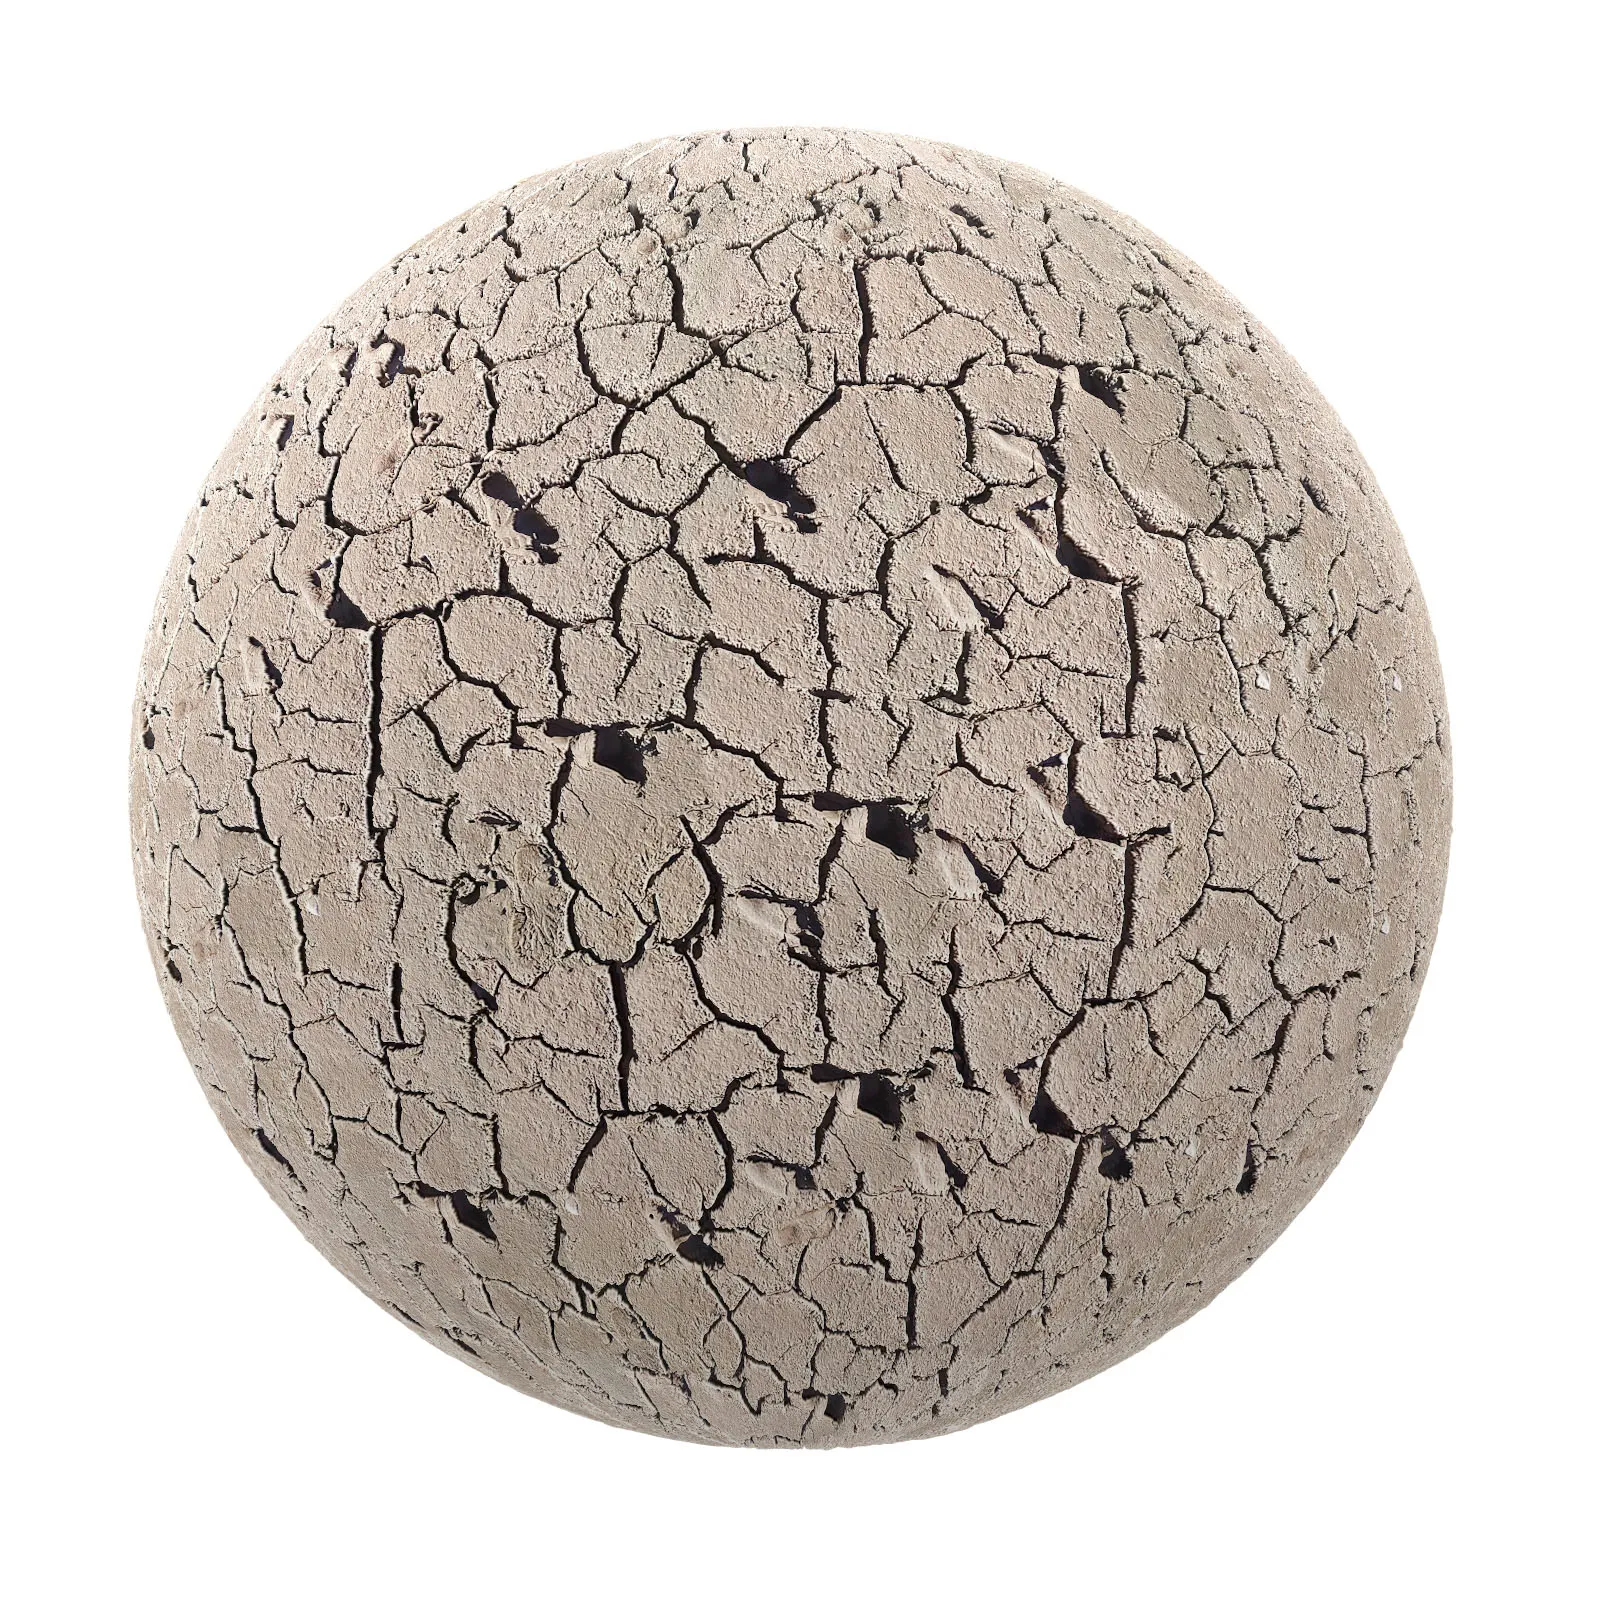 PBR CGAXIS TEXTURES – SOIL – Dry Cracked Dirt 12